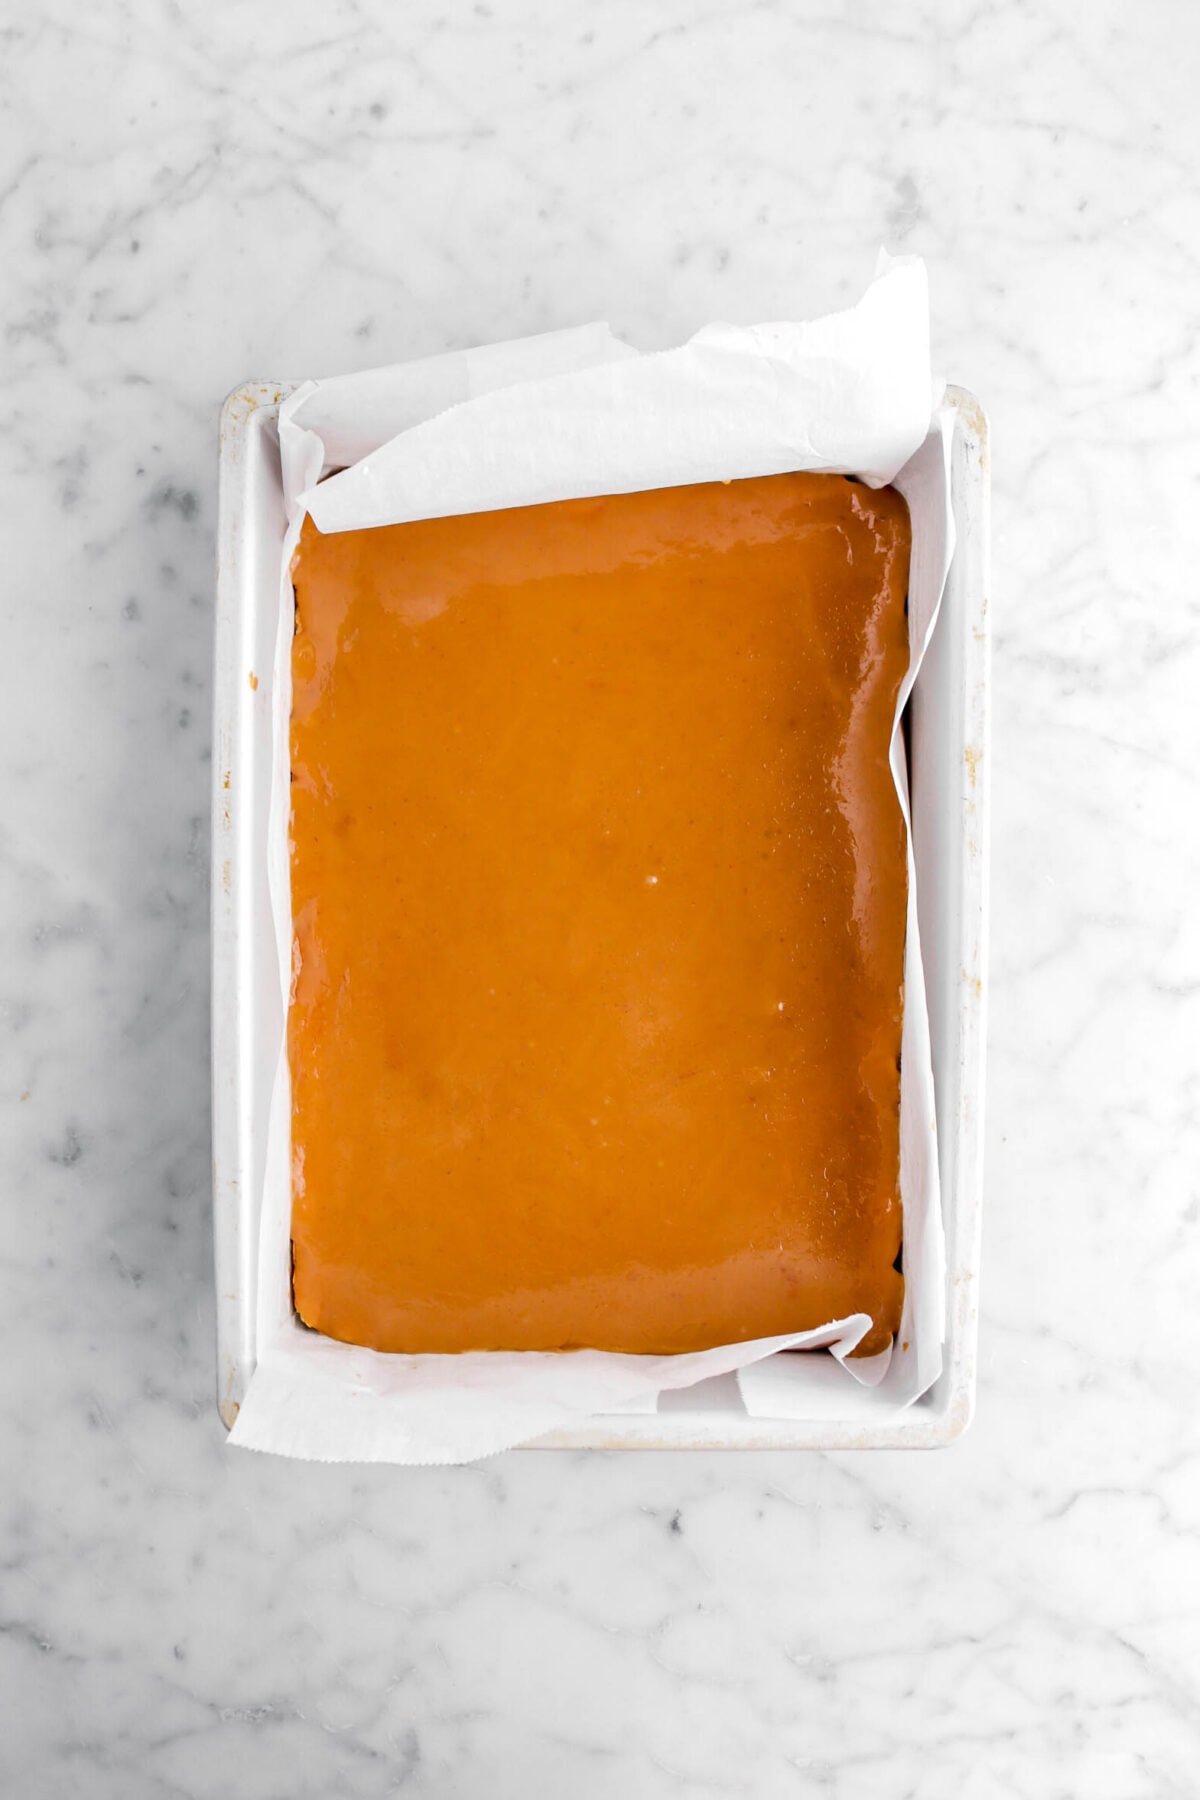 caramel on top of shortbread in lined cake pan.